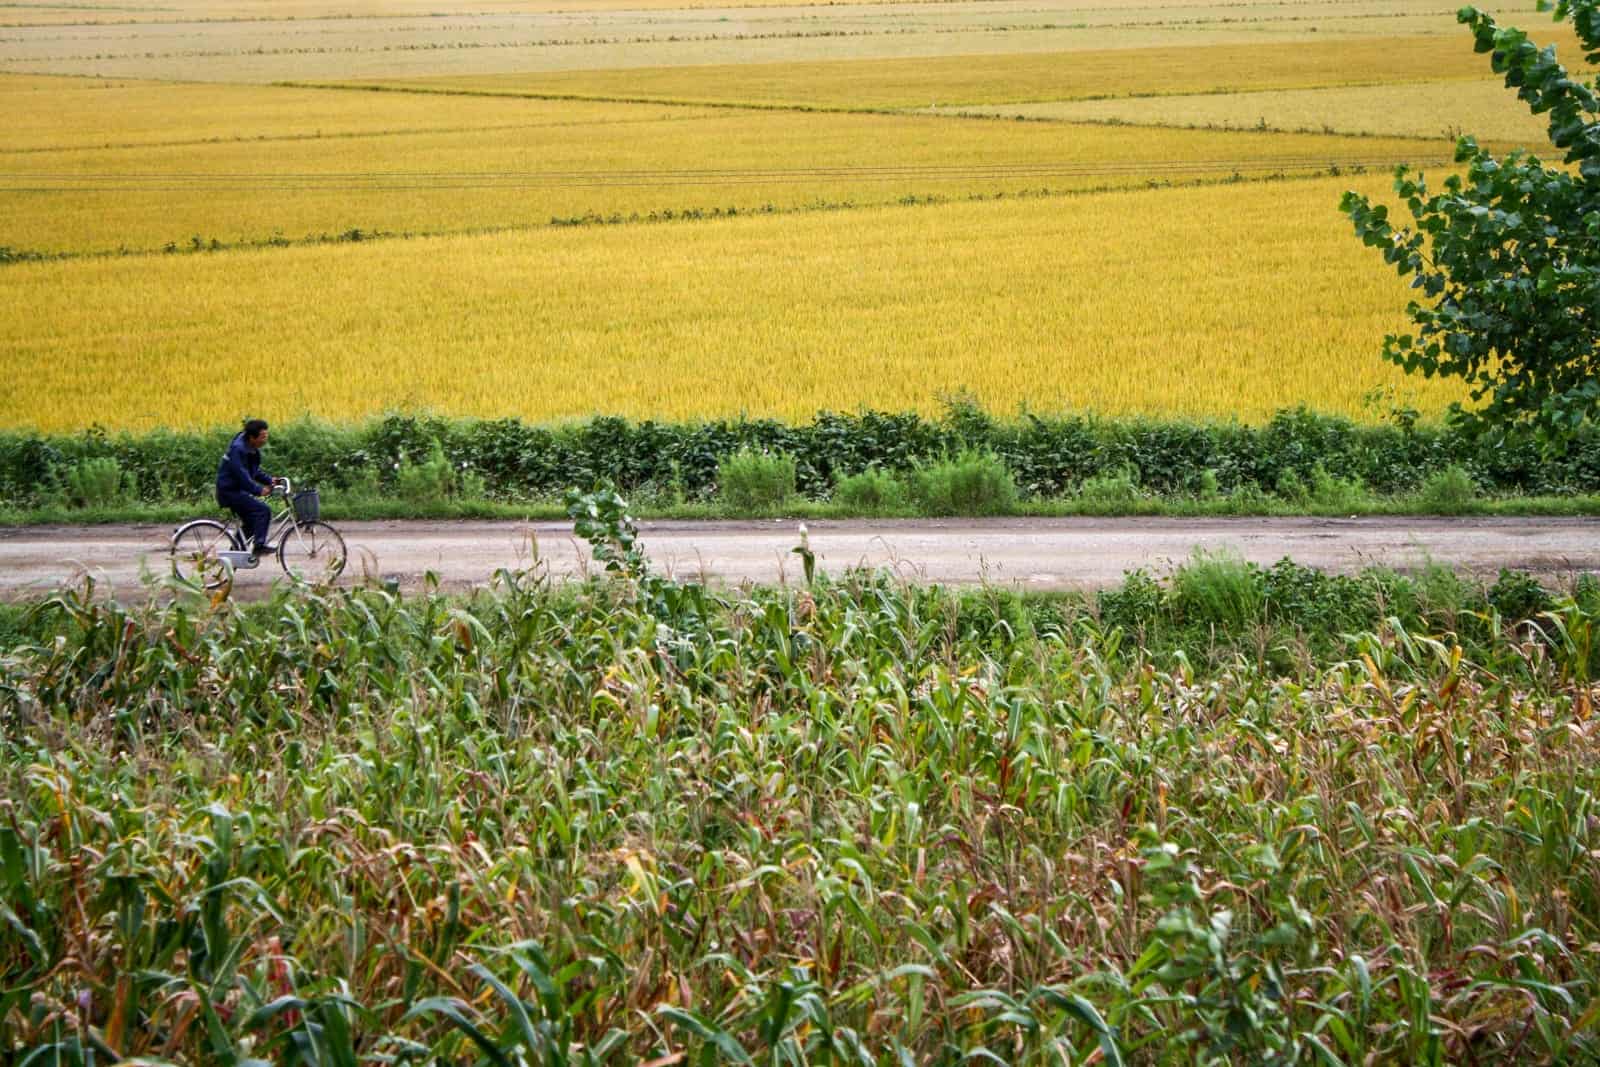 A North Korean rides a bike in the lush countryside near Nampo outside of Pyongyang, DPRK